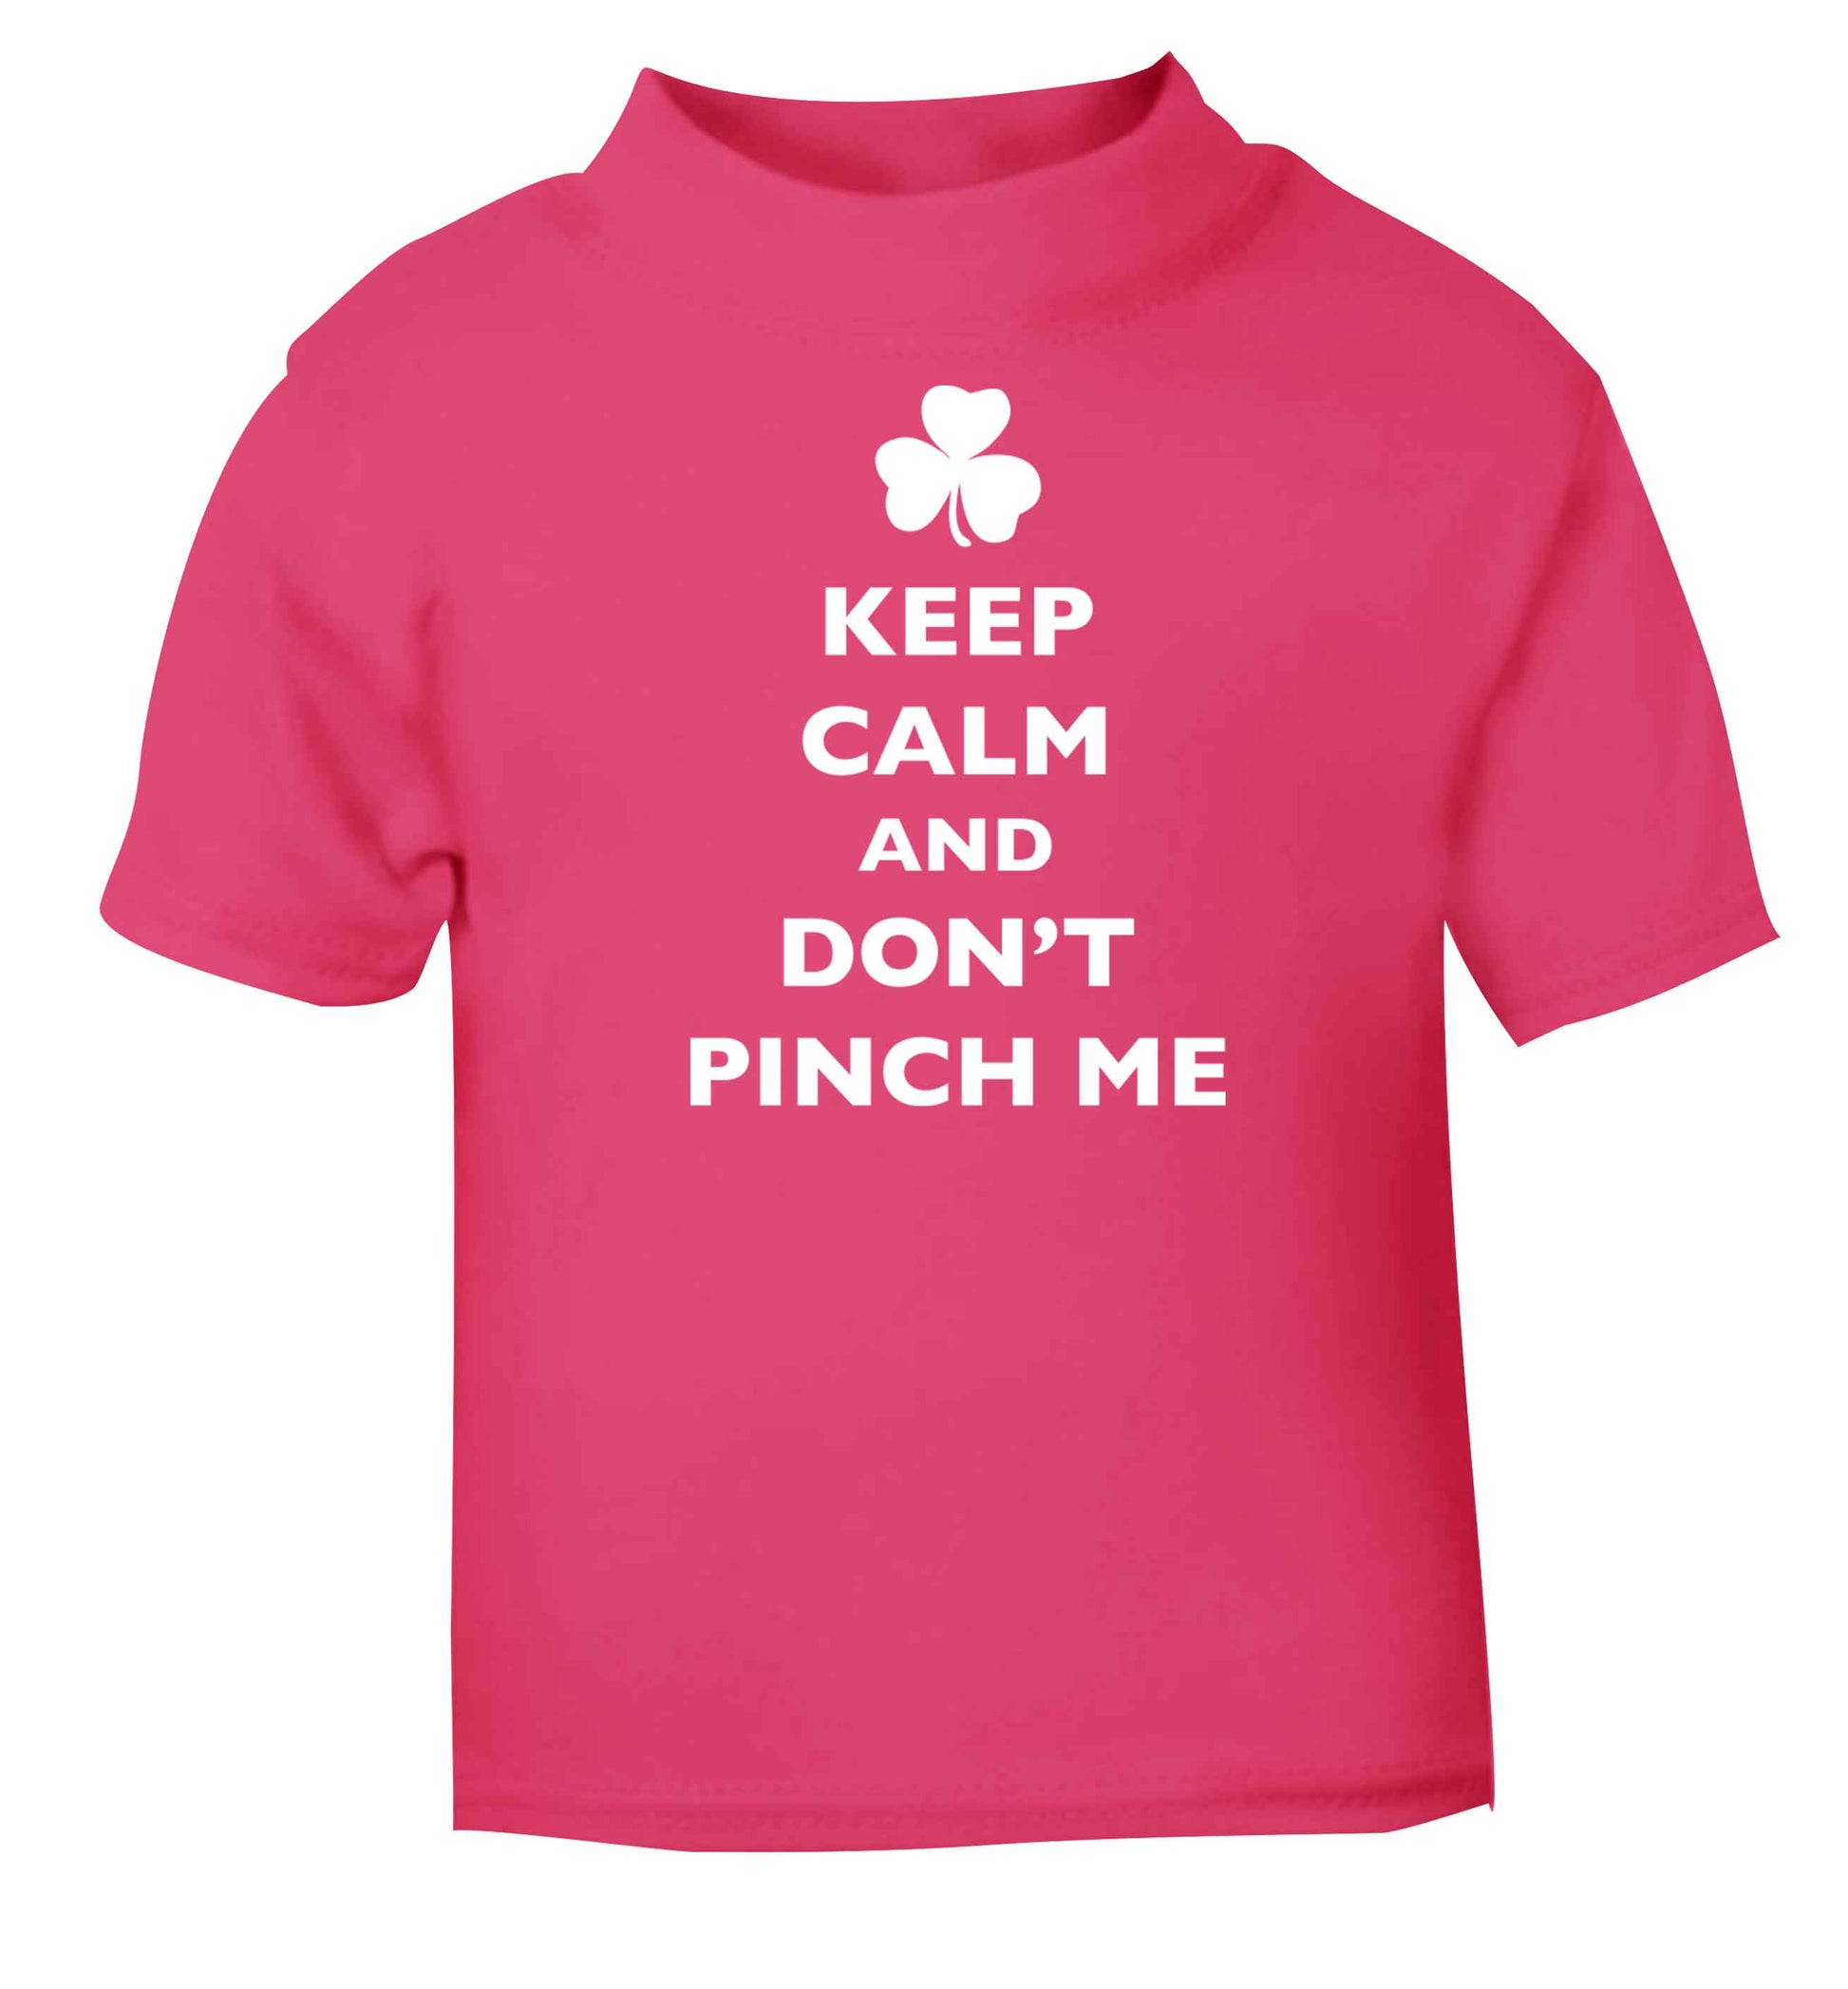 Keep calm and don't pinch me pink baby toddler Tshirt 2 Years